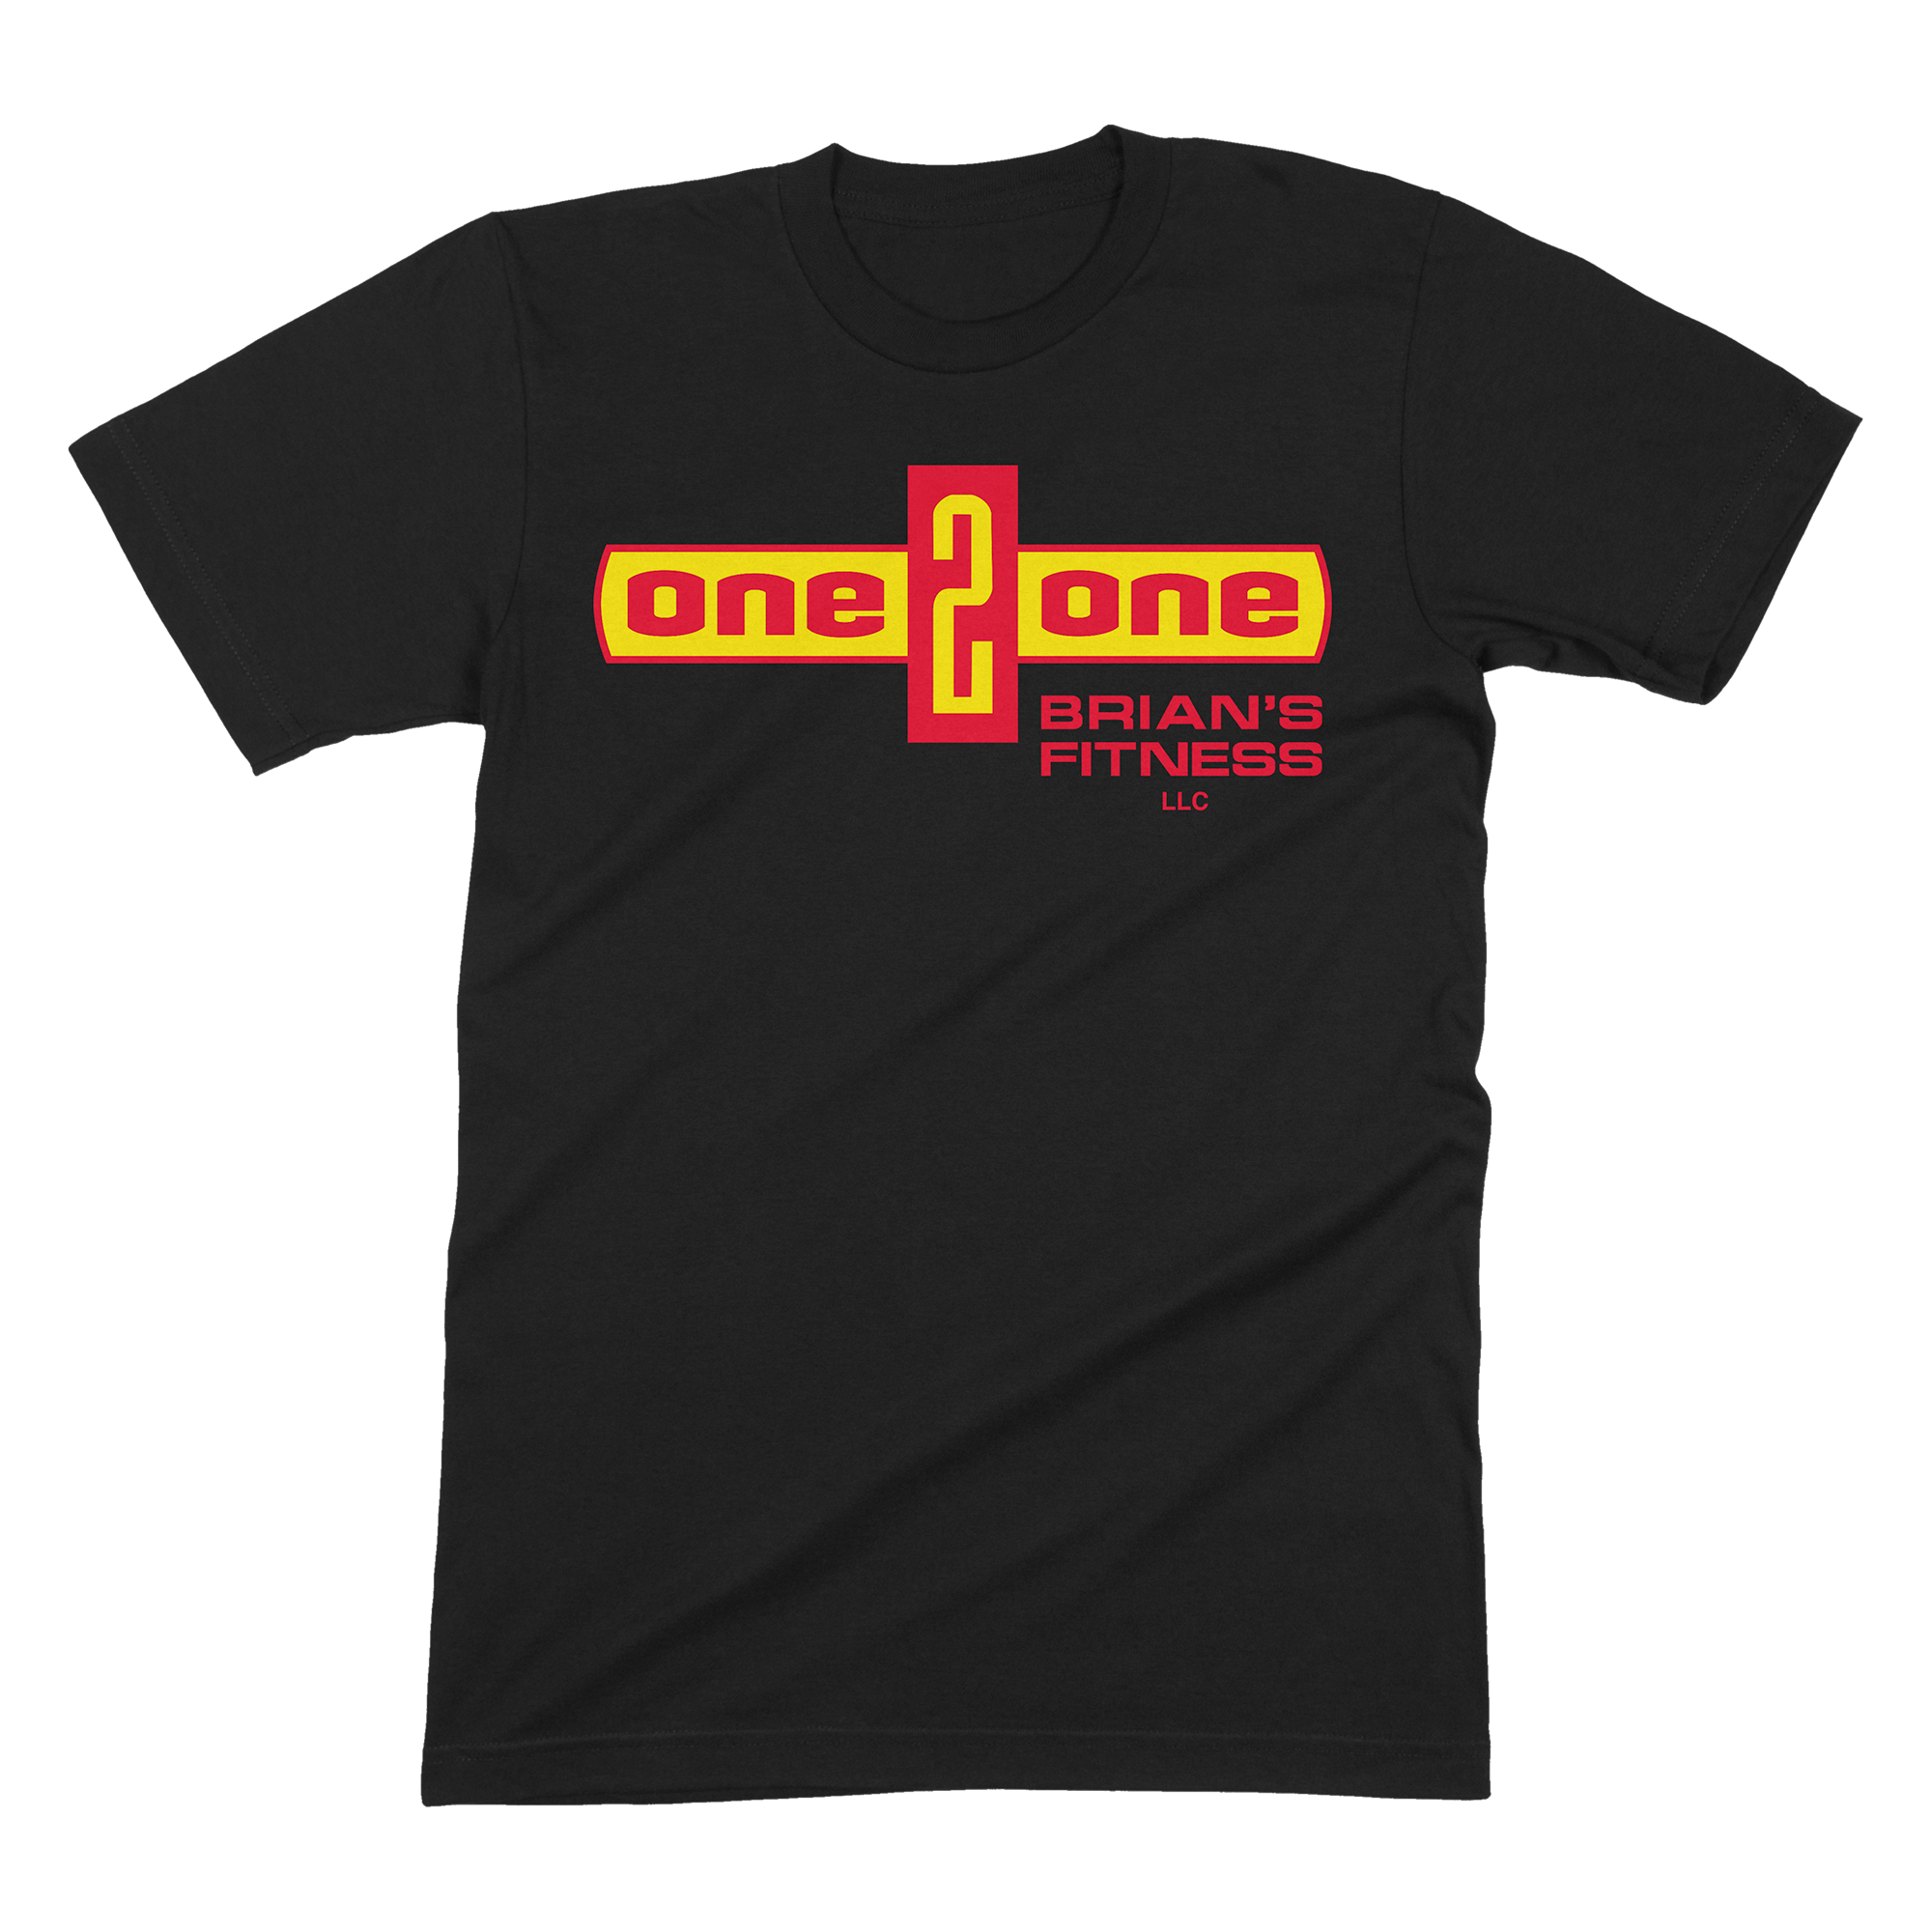 One 2 One Fitness - Uncommon Breed Unisex Shirt